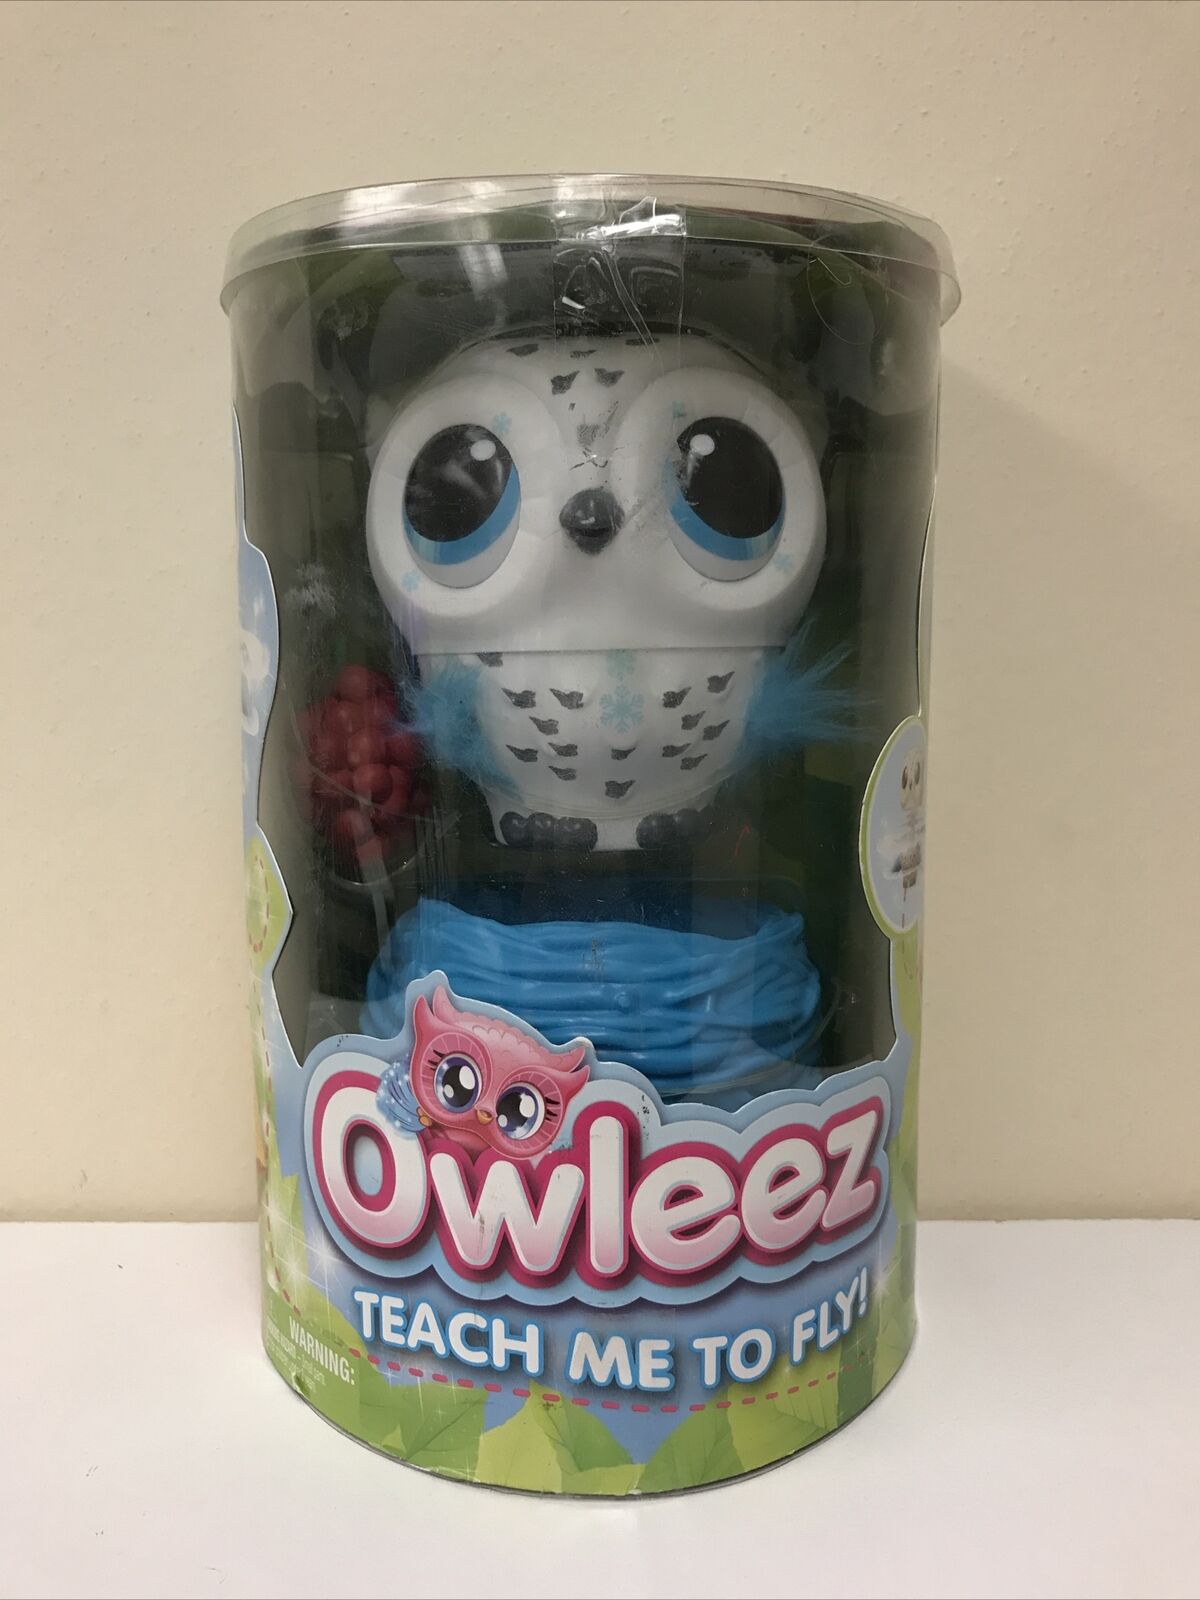 Owleez - Teach Me To Fly! Rechargeable Interactive Pet - New: Damaged Retail Box